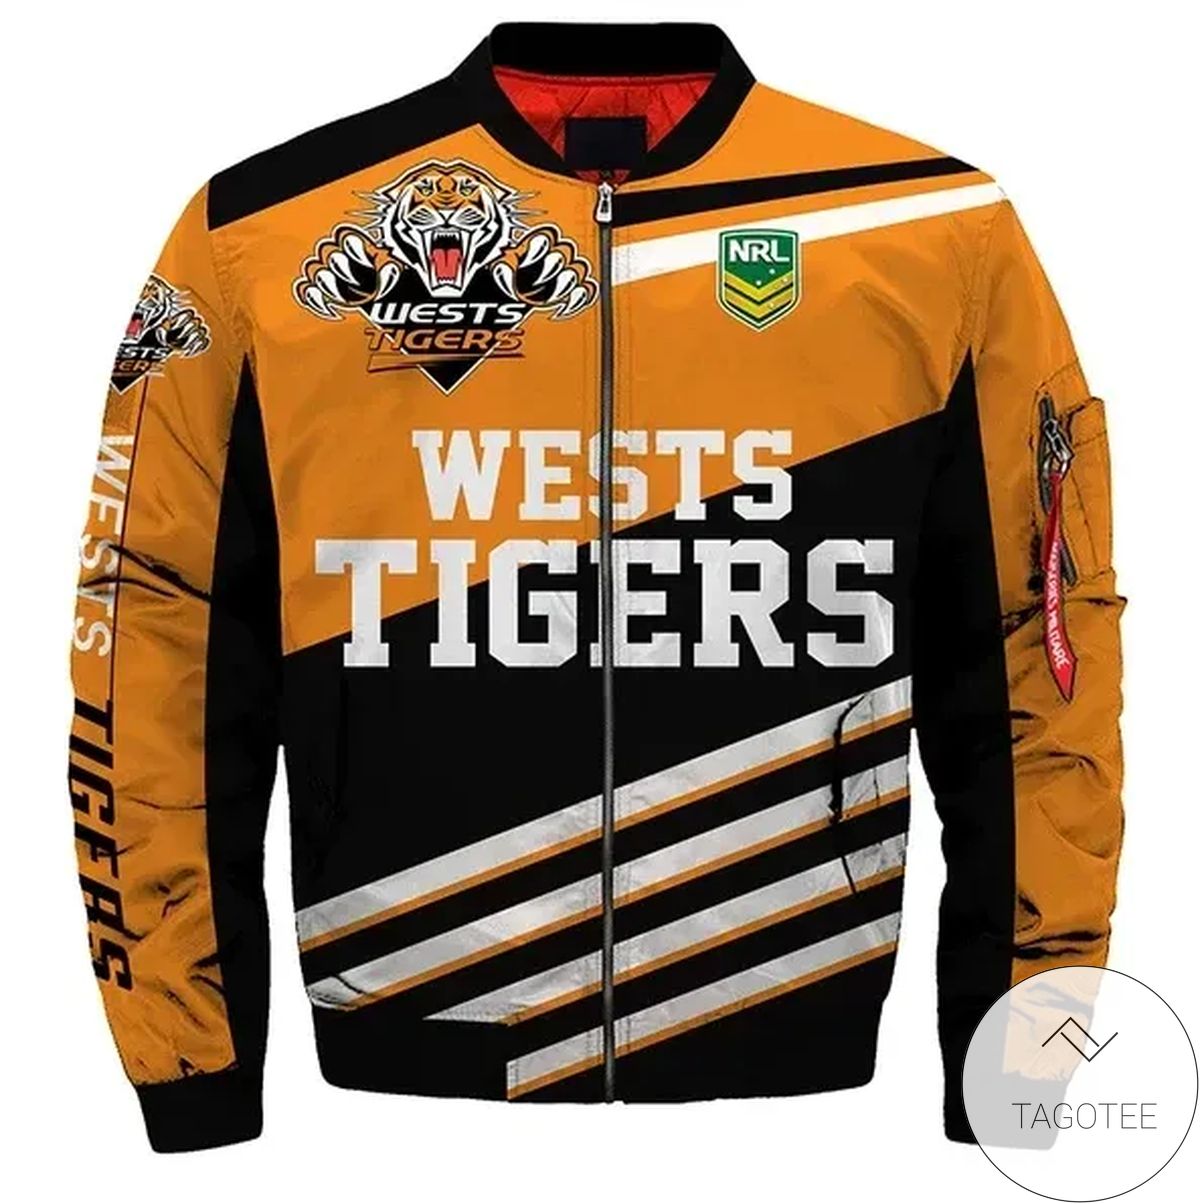 Wests Tigers Professional Rugby Team 3d Printed Unisex Bomber Jacket